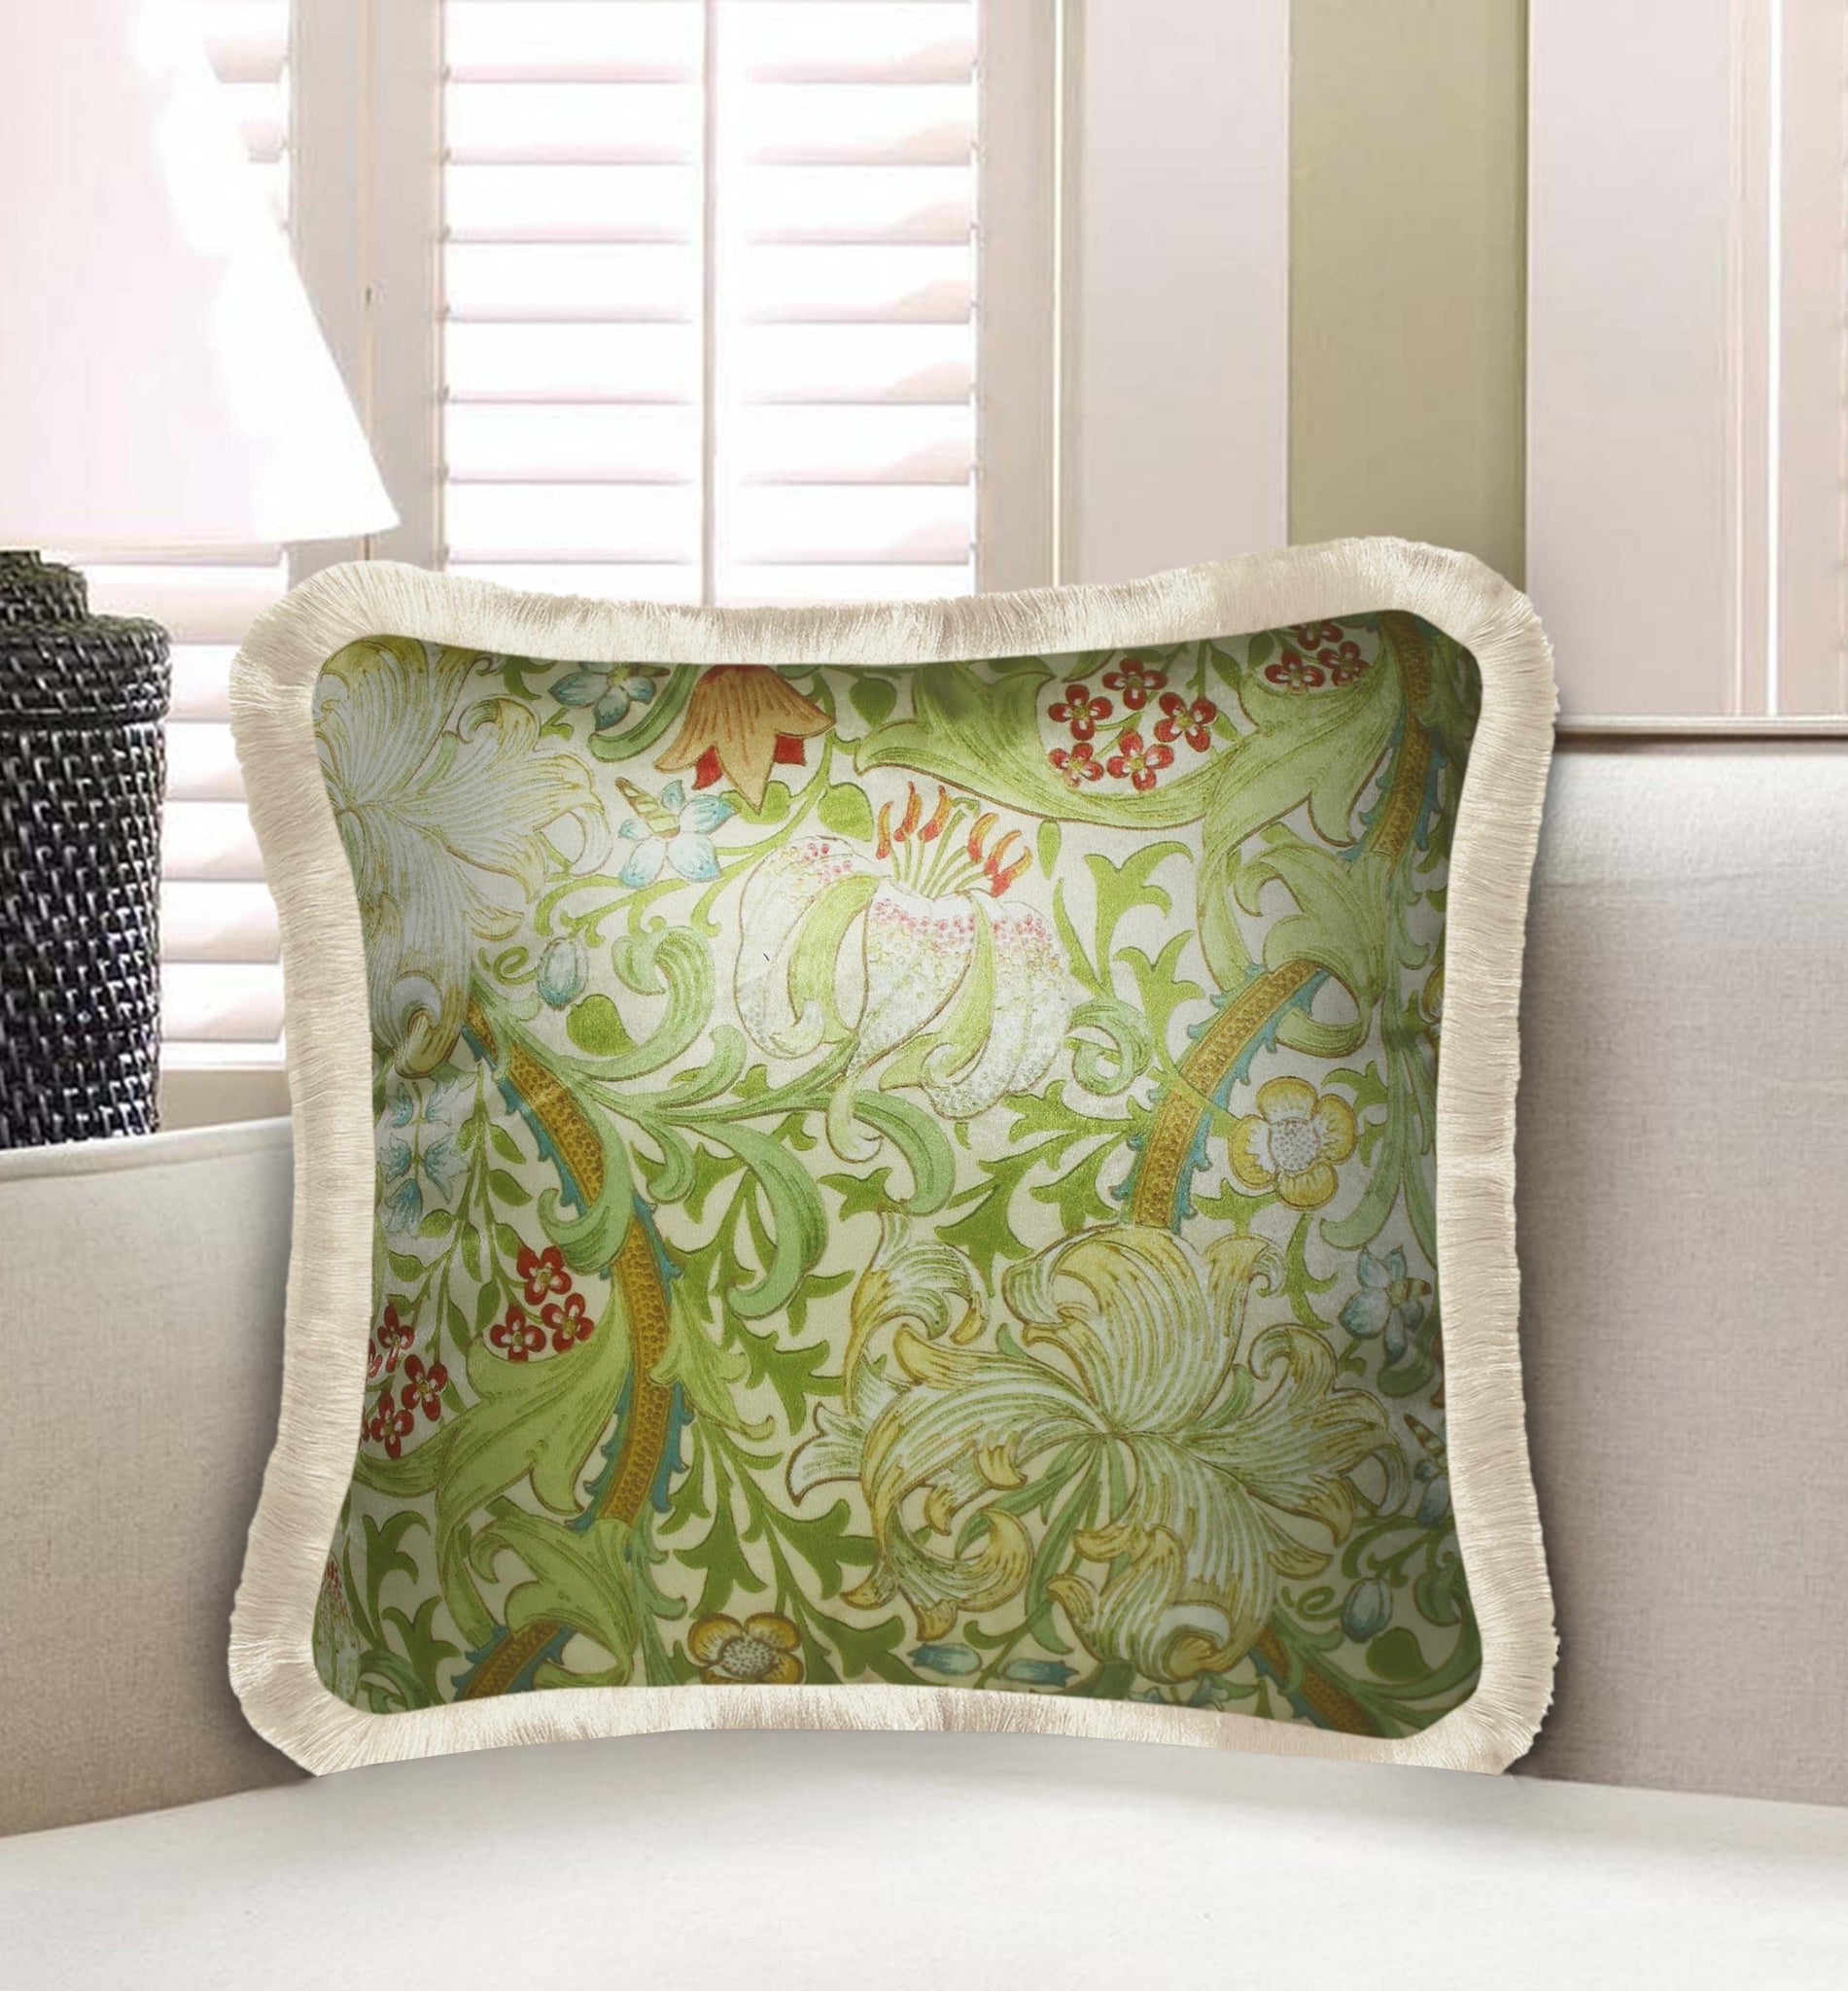 Green Velvet Cushion Cover William Morris Botanic Leaf Decorative Pillowcase Vintage Home Décor Throw Pillow for Sofa Chair Couch Bedroom 45x45 cm 18x18 In